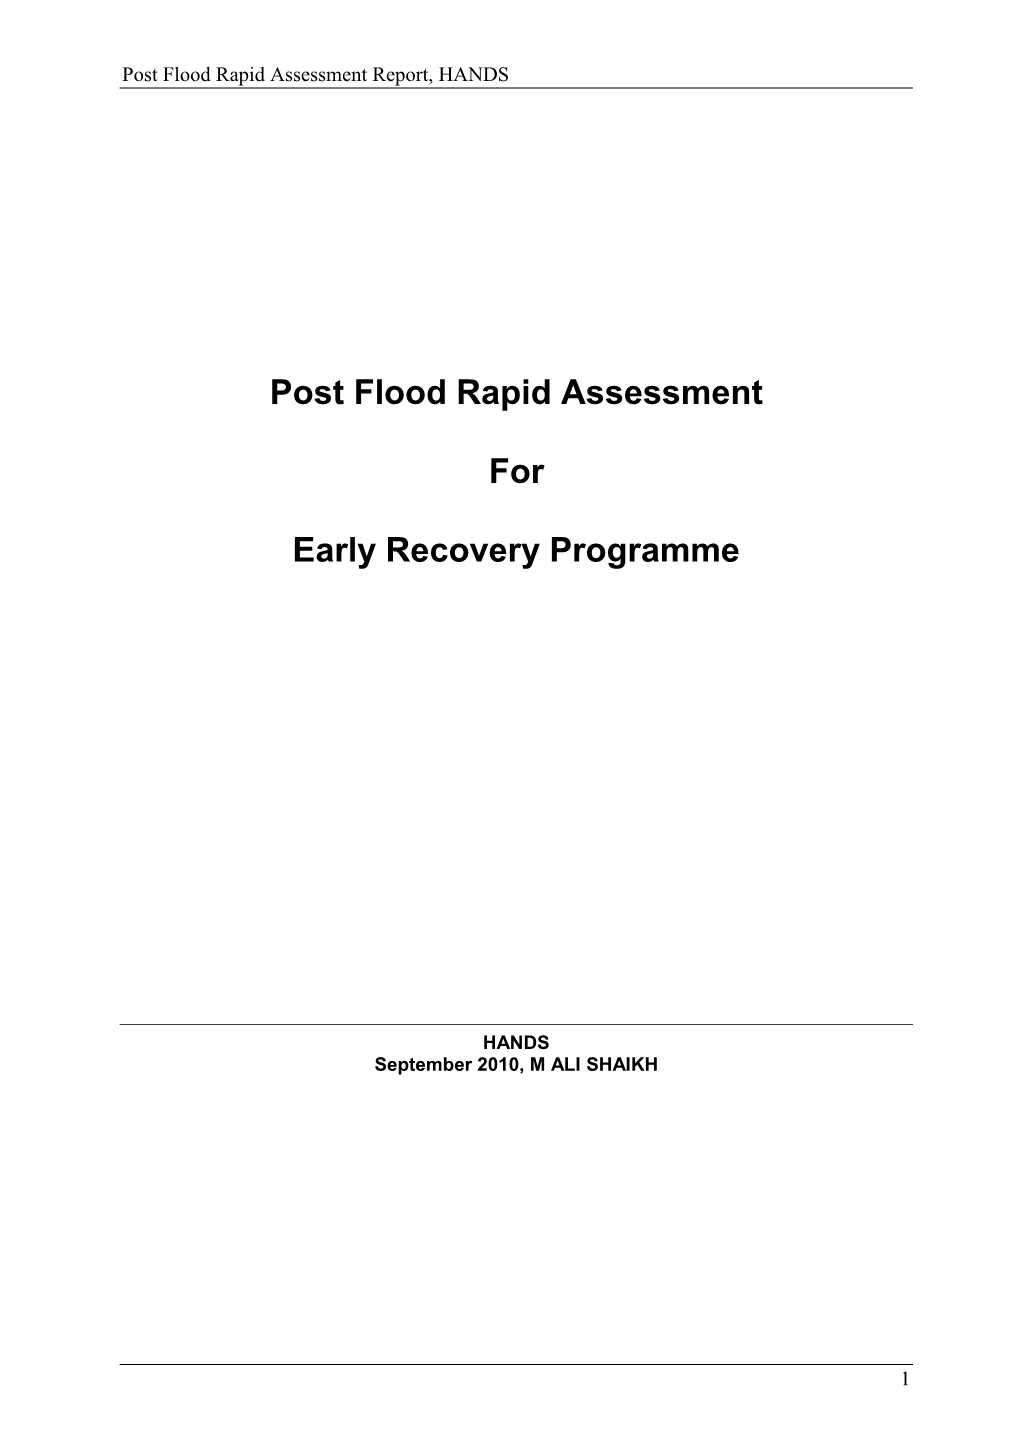 Post Flood Rapid Assessment for Early Recovery Programme